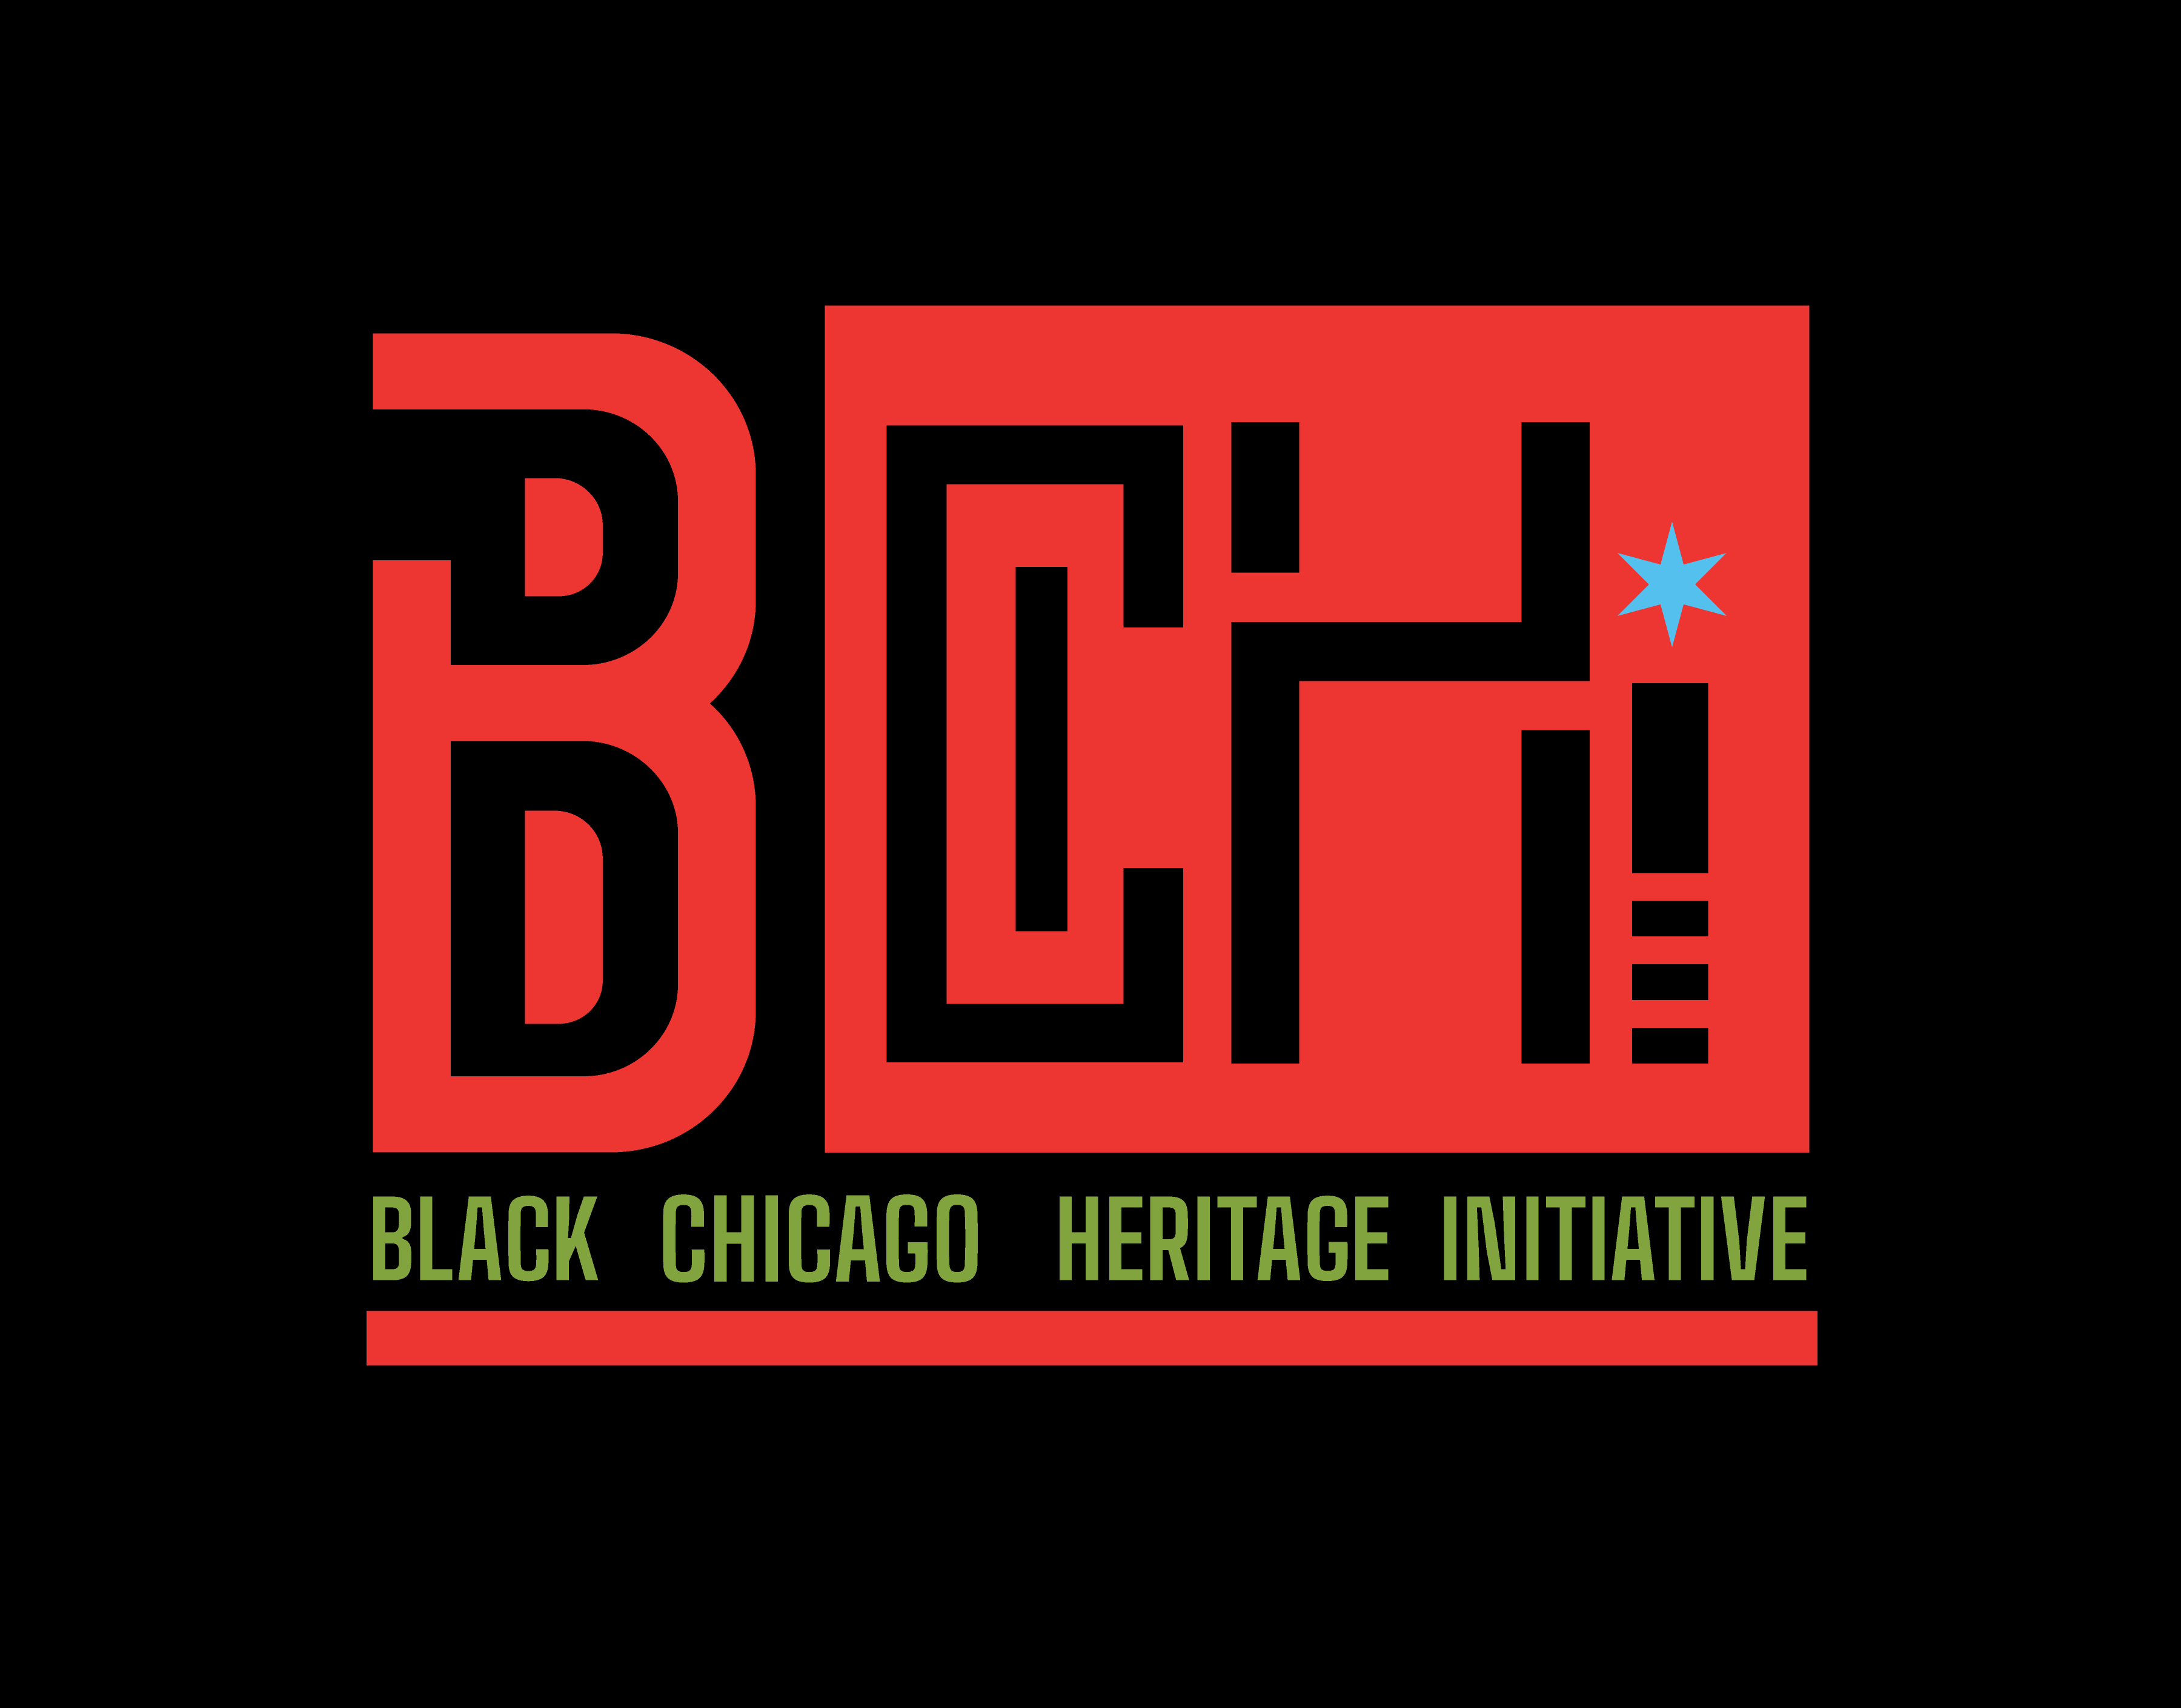 Announcement of the Black Chicago Heritage Initiative